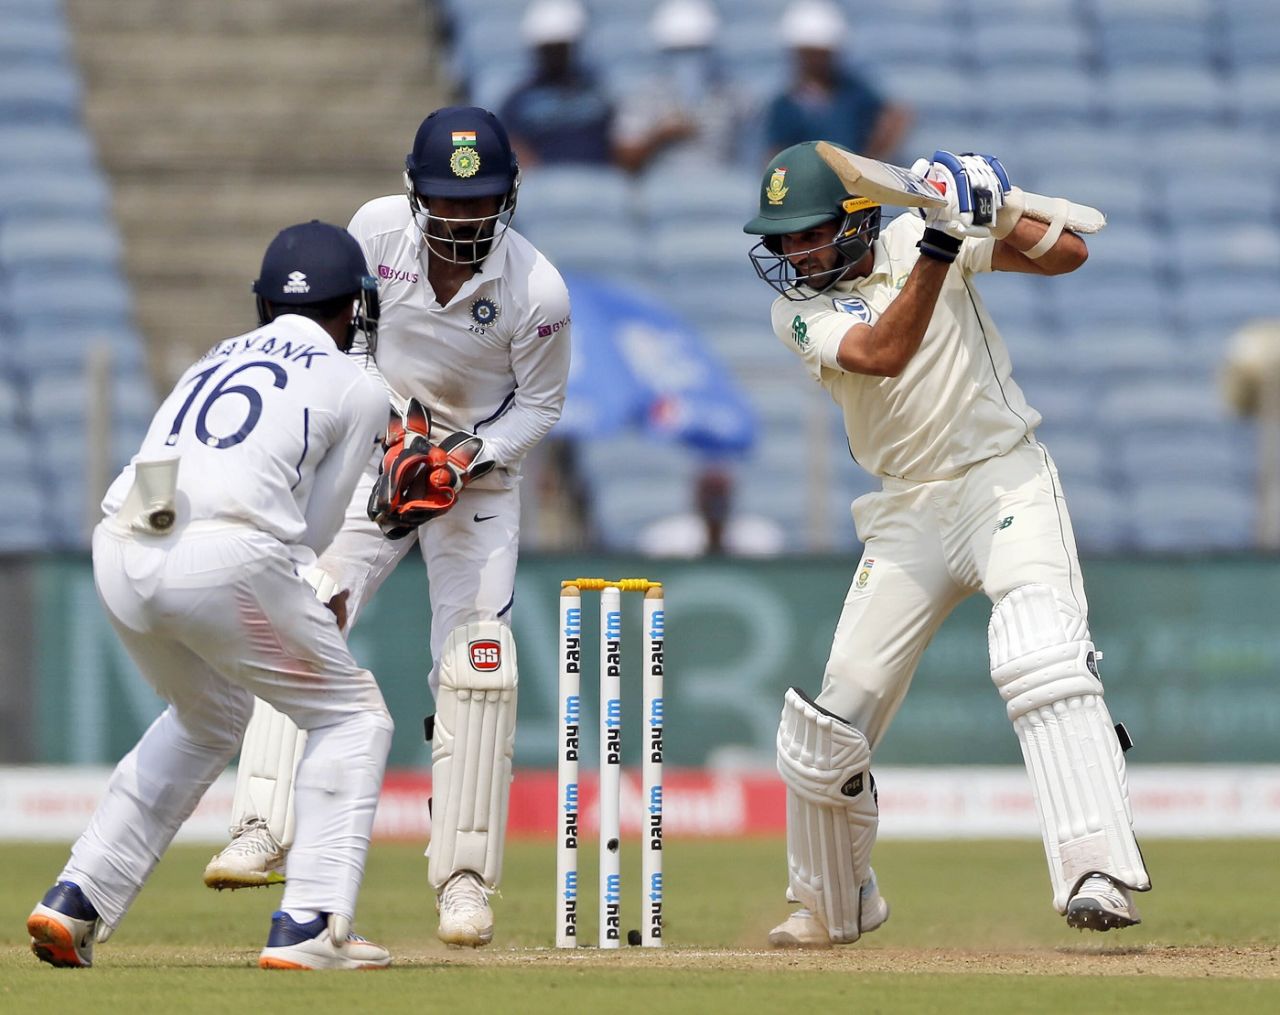 Keshav Maharaj punches off the back foot, India v South Africa, 2nd Test, Pune, 4th day, October 13, 2019